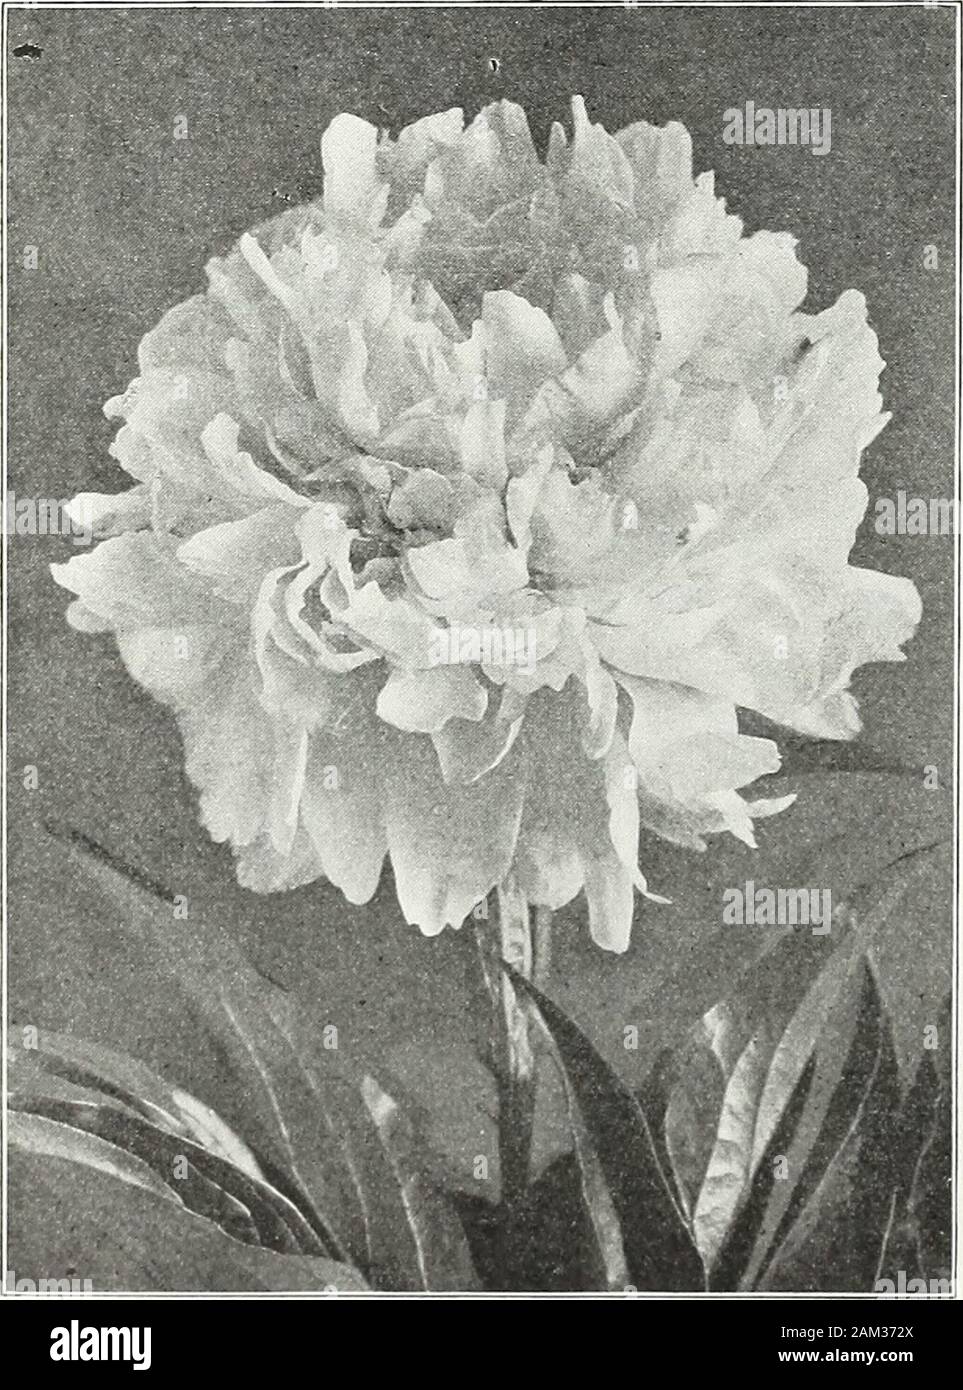 Farquhar's garden annual : 1922 . PsEony, Baroness Schroeder. P£Eony Monsieur Jules Elie. Rosea Superba. 2. Large blooms of brilliant cerise-pink, borne onlong stems. Strong and vigorous. SI.25 each; S12.00 per doz. Rosea Plena Superba. 3. Immense, full blooms of delicate salmon-pink. Invaluable for cutting. Sl.OO each; SIO.OO per doz. Snowball. 2. Medium size, globular, semi-rose type. Pure white;fragrant. Medium height. 50 cents each; S5.00 per doz. Walter Faxon. The large blooms are of the globular semi-rose type,bright rose deepening towards the centre; fragrant and free-bloomer.S5.00 each Stock Photo